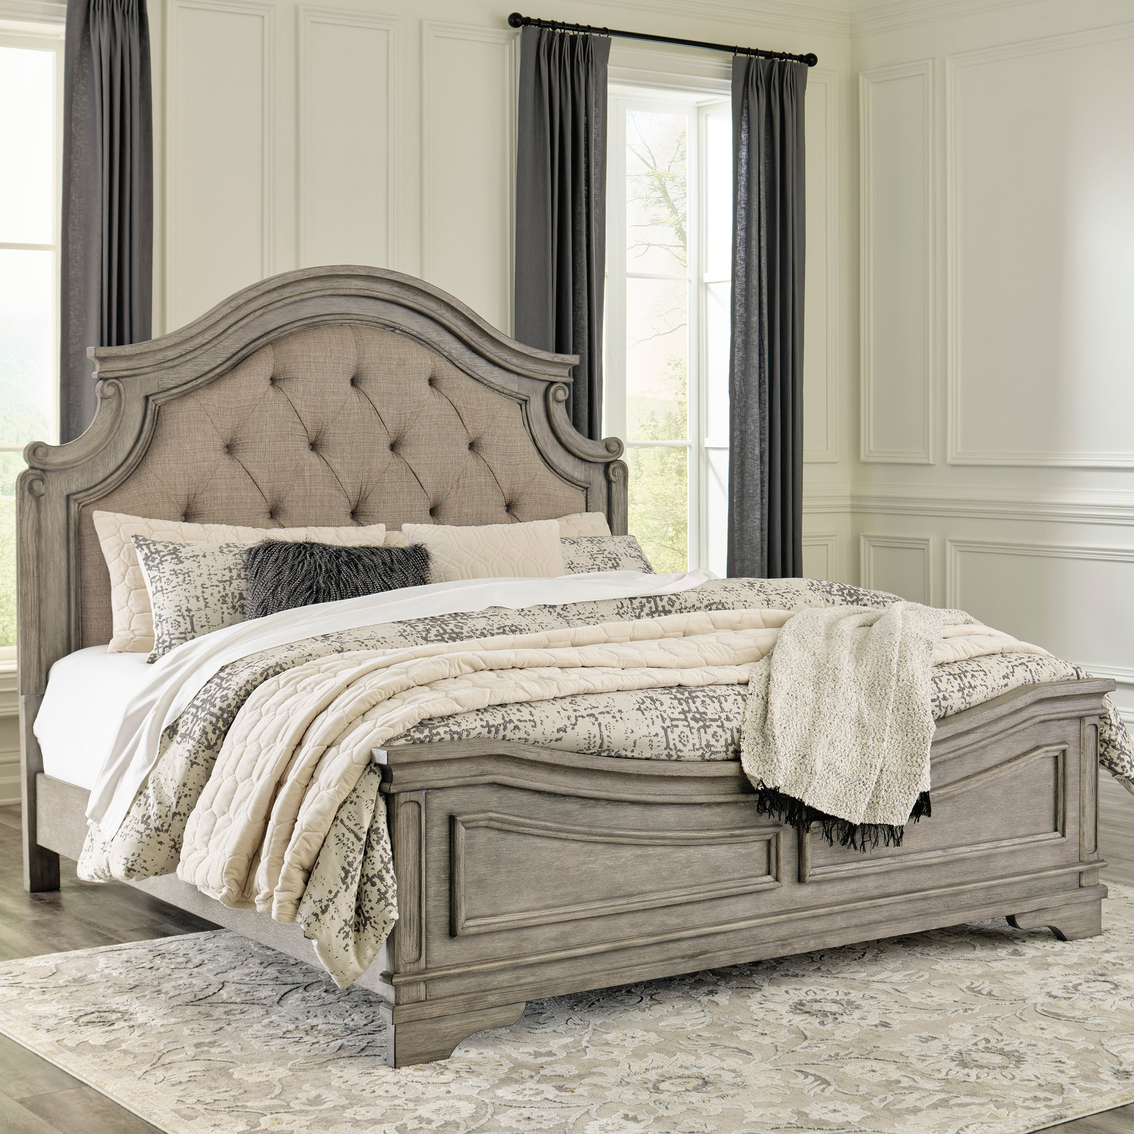 Signature Design by Ashley Bedroom Set 5 pc. - Image 2 of 10